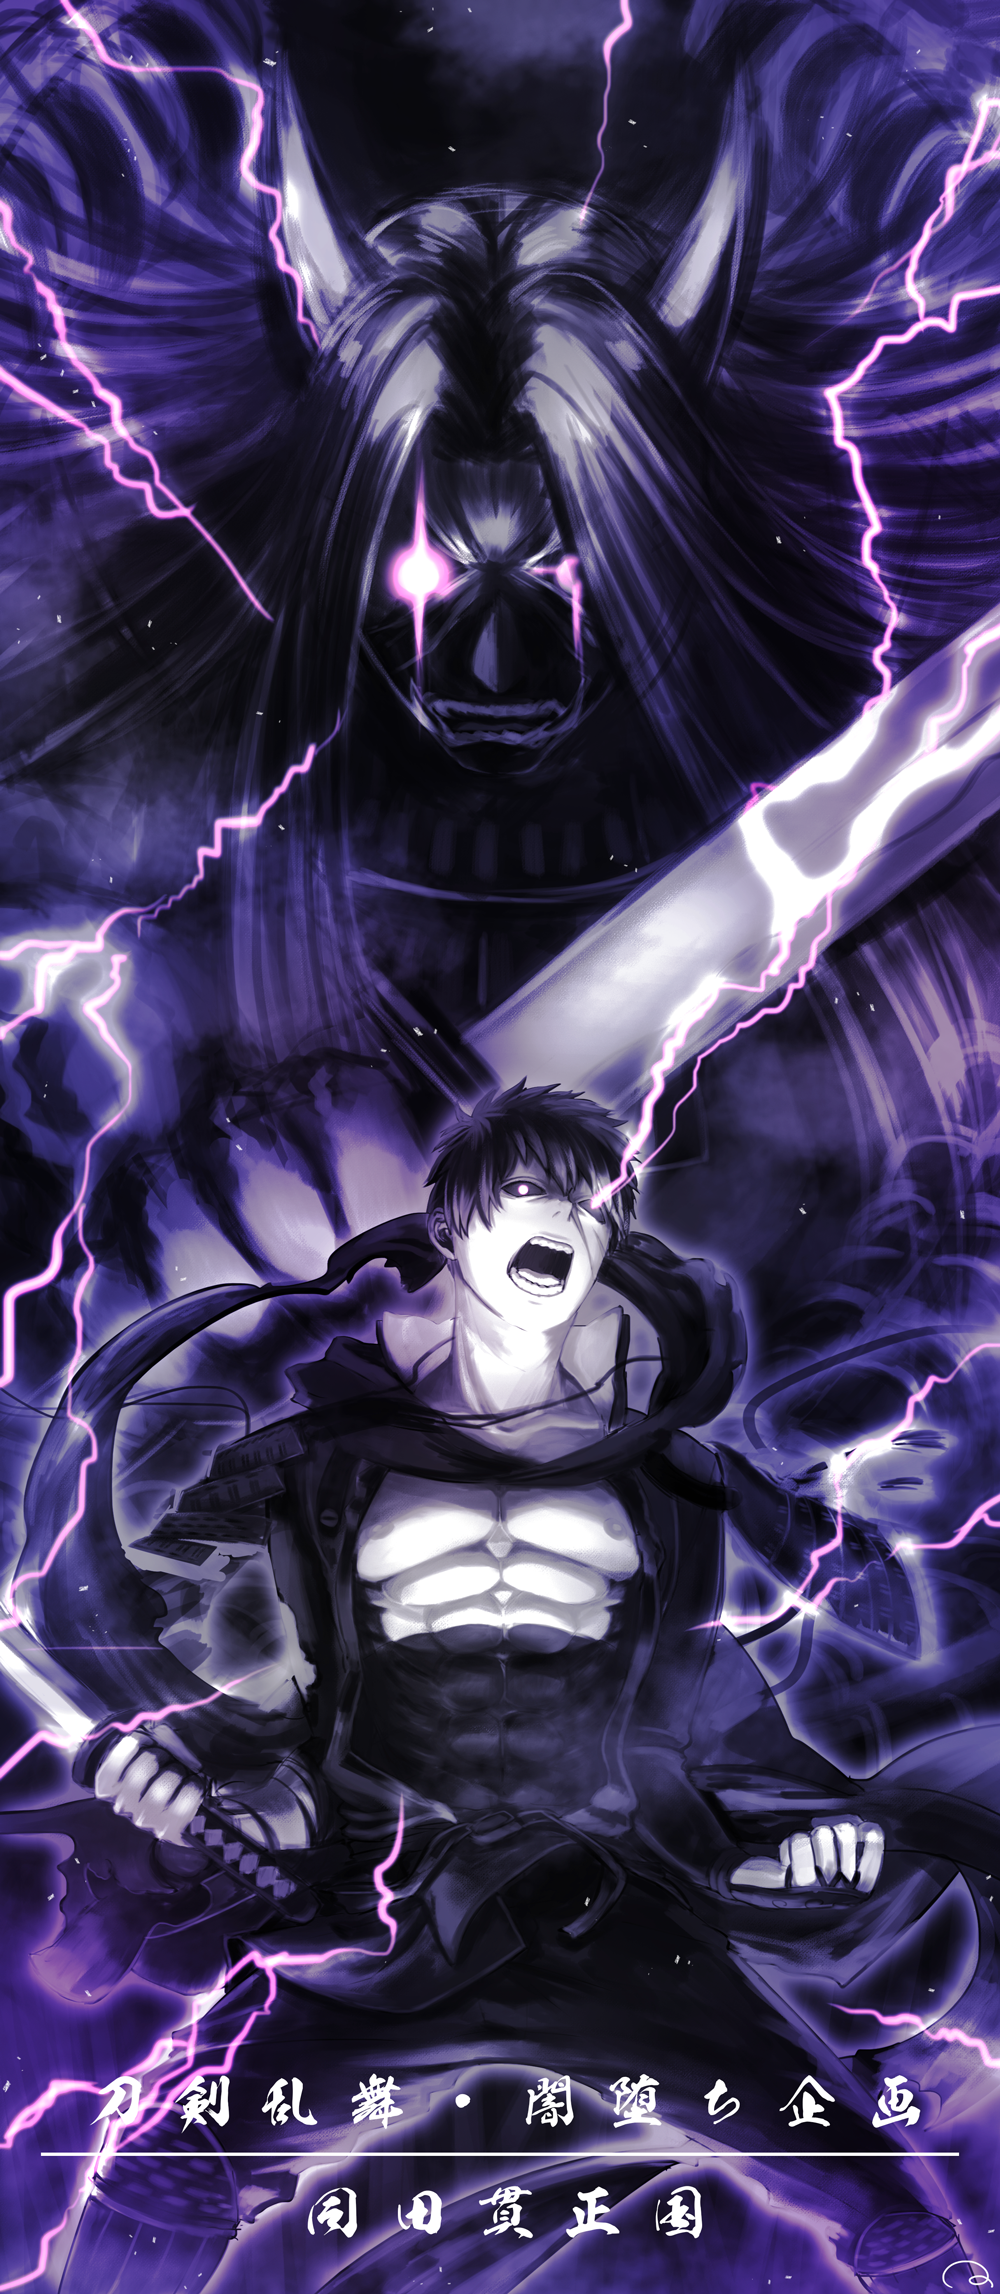 2boys angry armor black_hair black_sclera clenched_hands dark_persona demon_horns doudanuki_masakuni enemy_ootachi glowing glowing_eye highres historical_revisionist holding holding_weapon horns japanese_armor lightning long_hair male_focus menpoo multiple_boys muscle nipples open_mouth pale_skin rokaji shouting sode touken_ranbu violet_eyes weapon